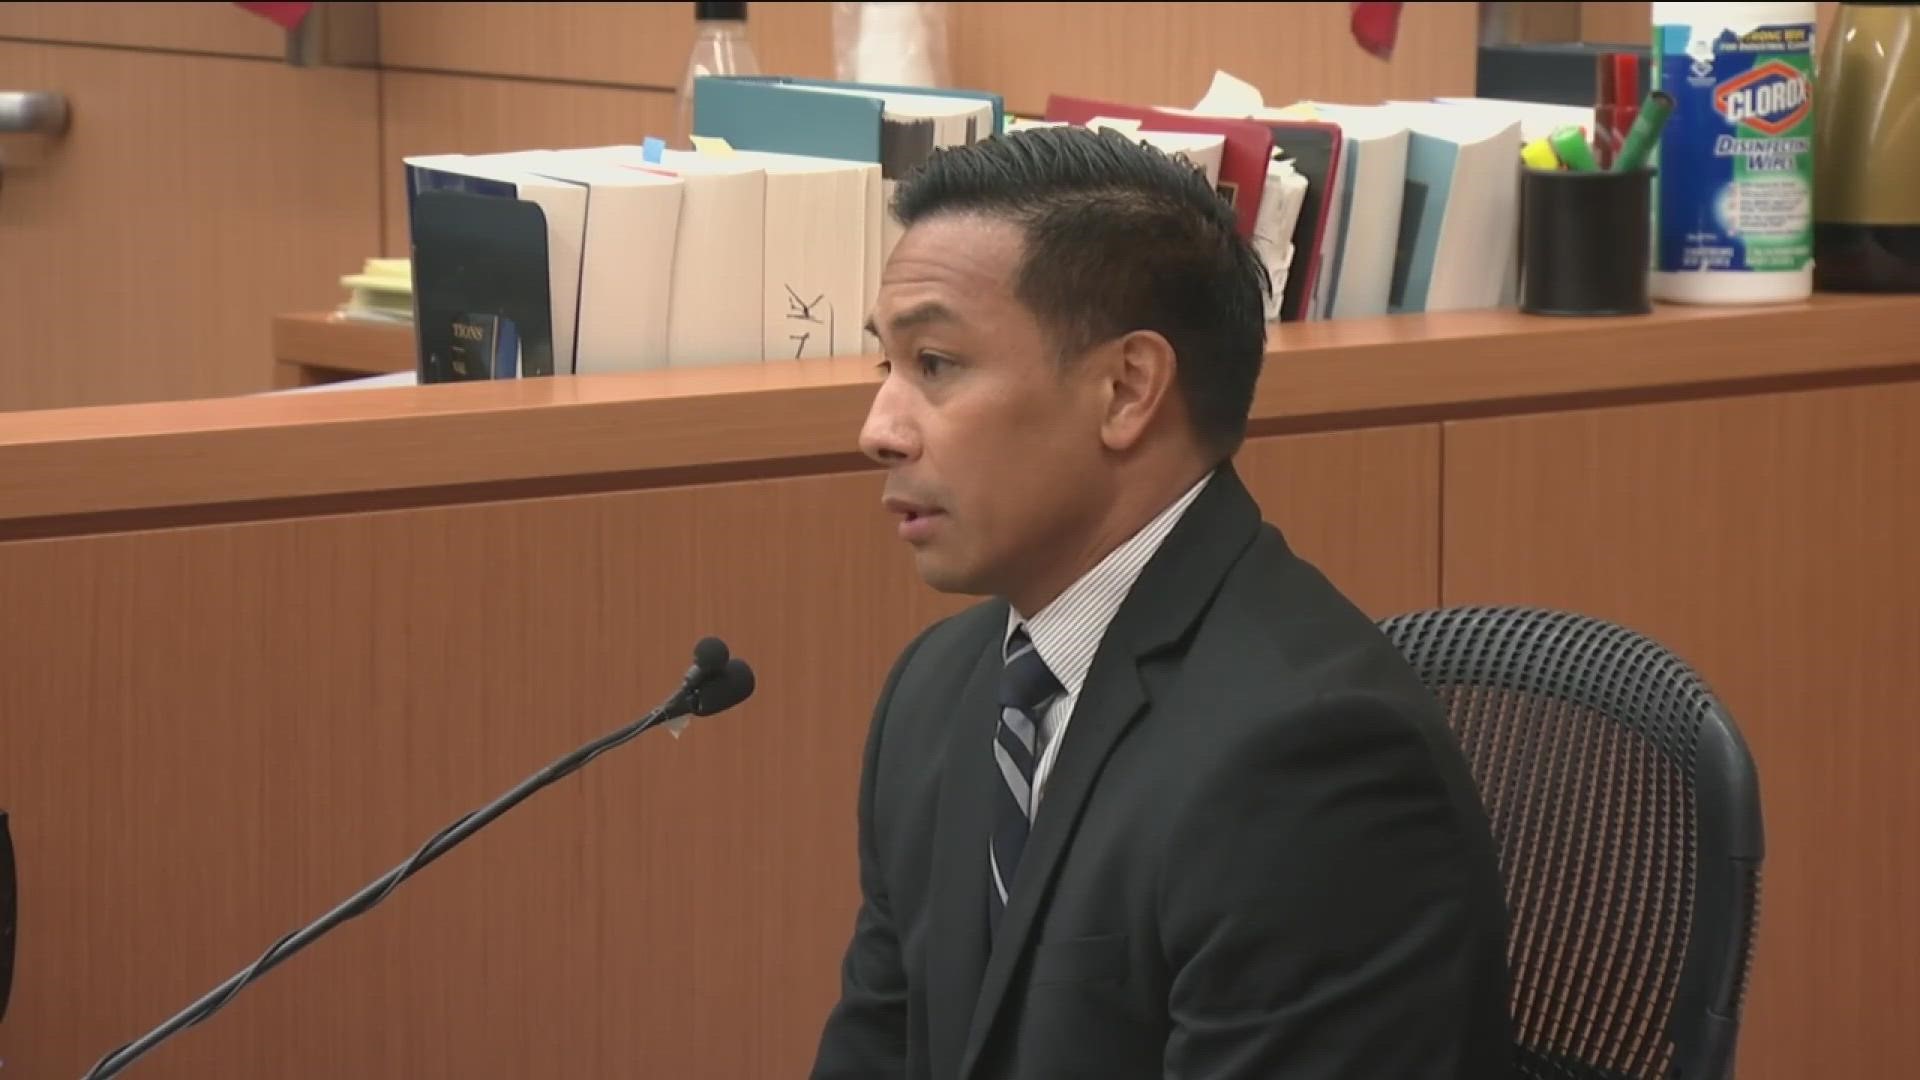 The preliminary hearing for Larry Millete, Chula Vista husband accused of murdering his wife Maya, is entering its eighth day of testimony.